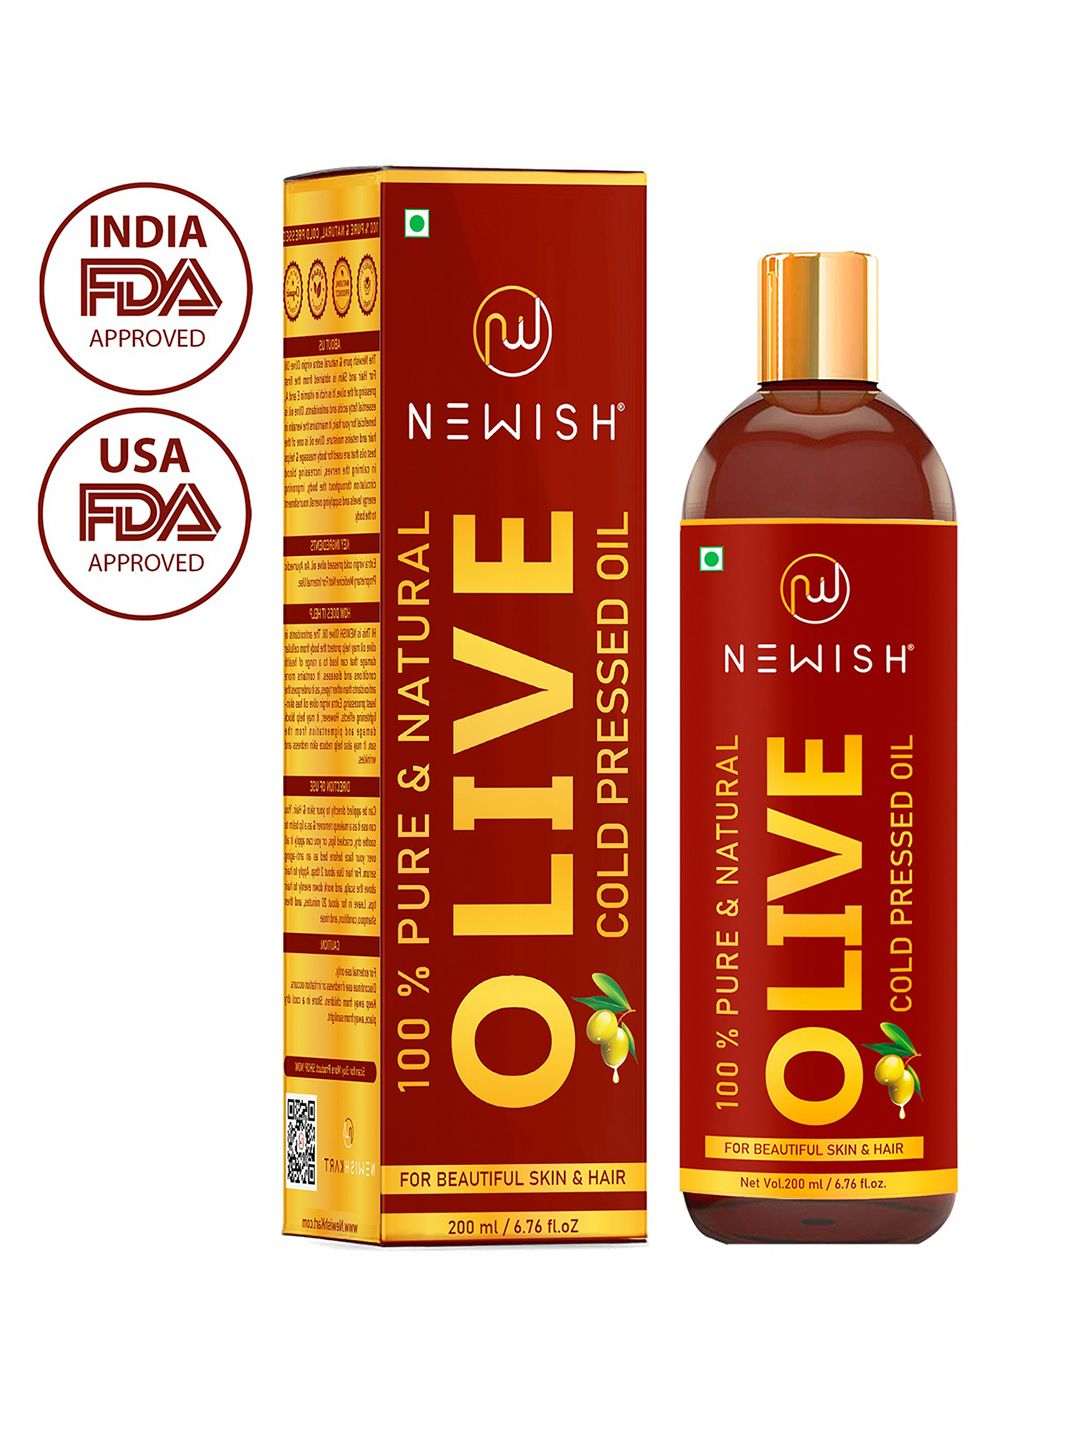 NEWISH Pure Cold Pressed Olive Oil For Hair and Skin, 200ml Price in India